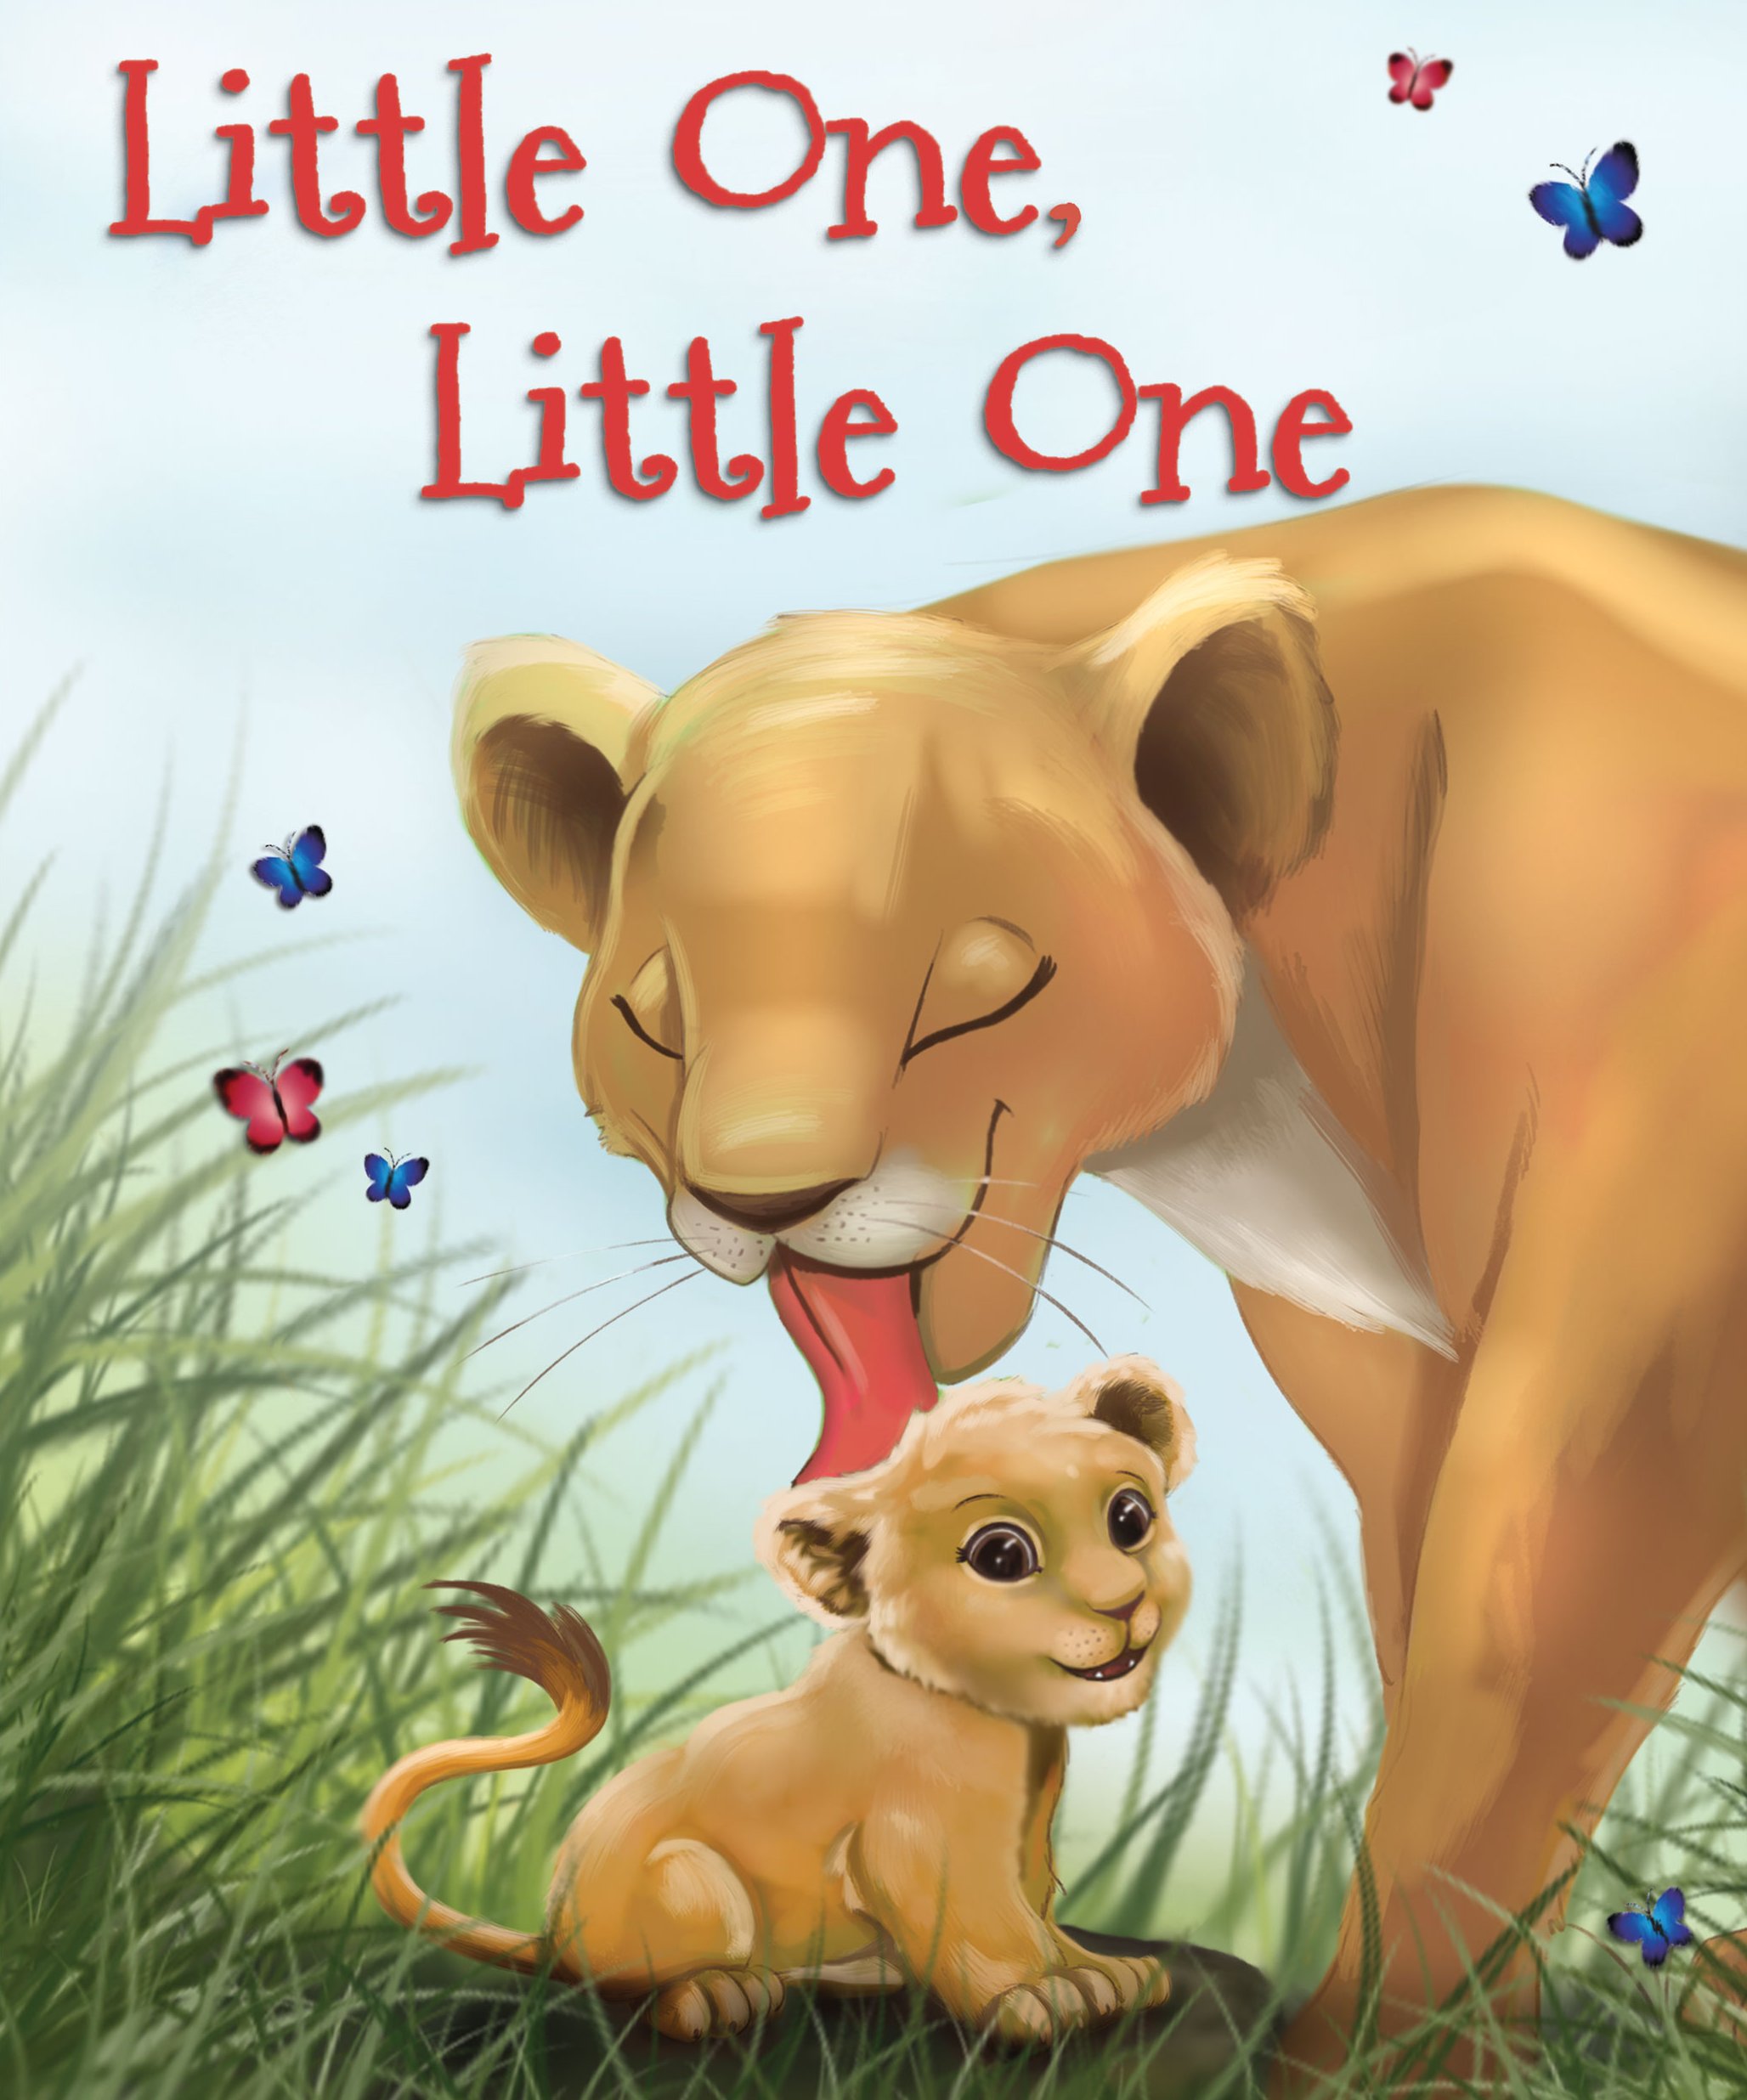 Little One, Little One, counting rhyming book for preschoolers and baby